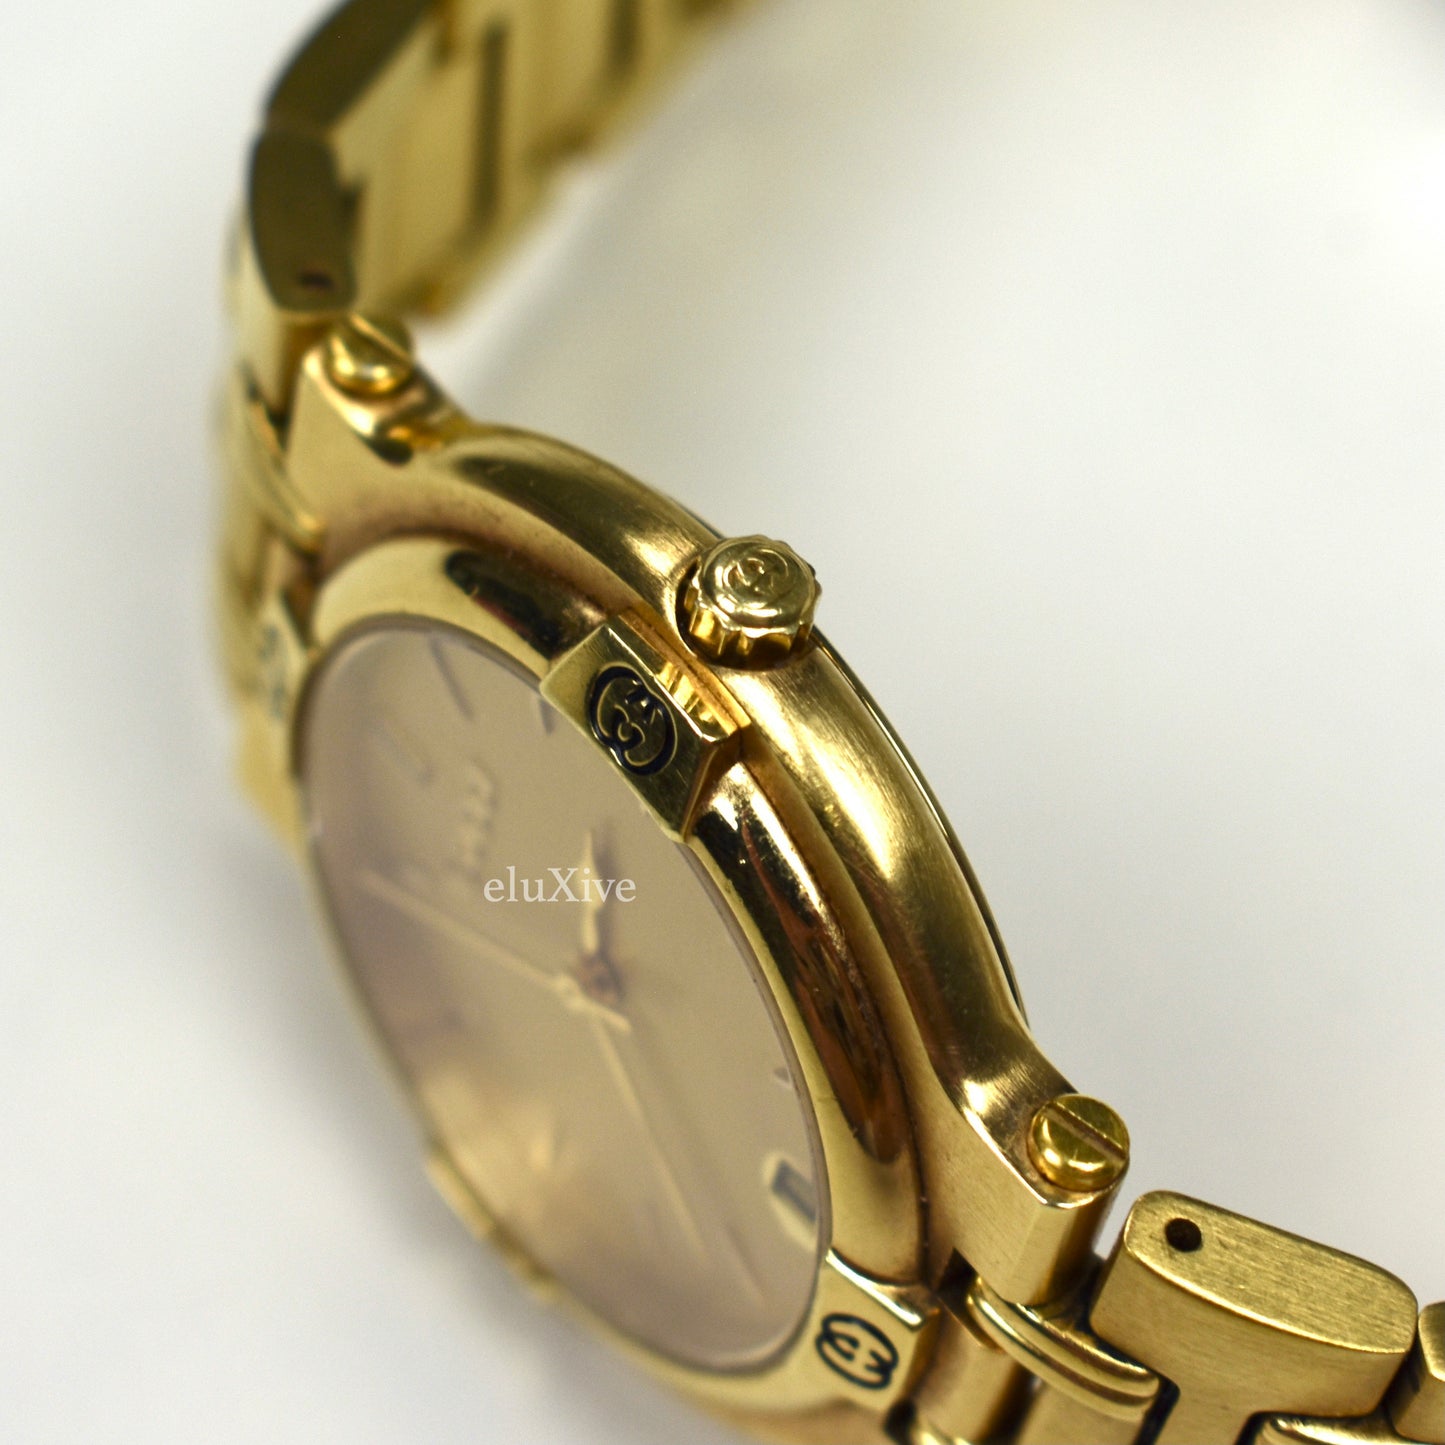 Gucci - 9200M Gold Champagne Dial Watch